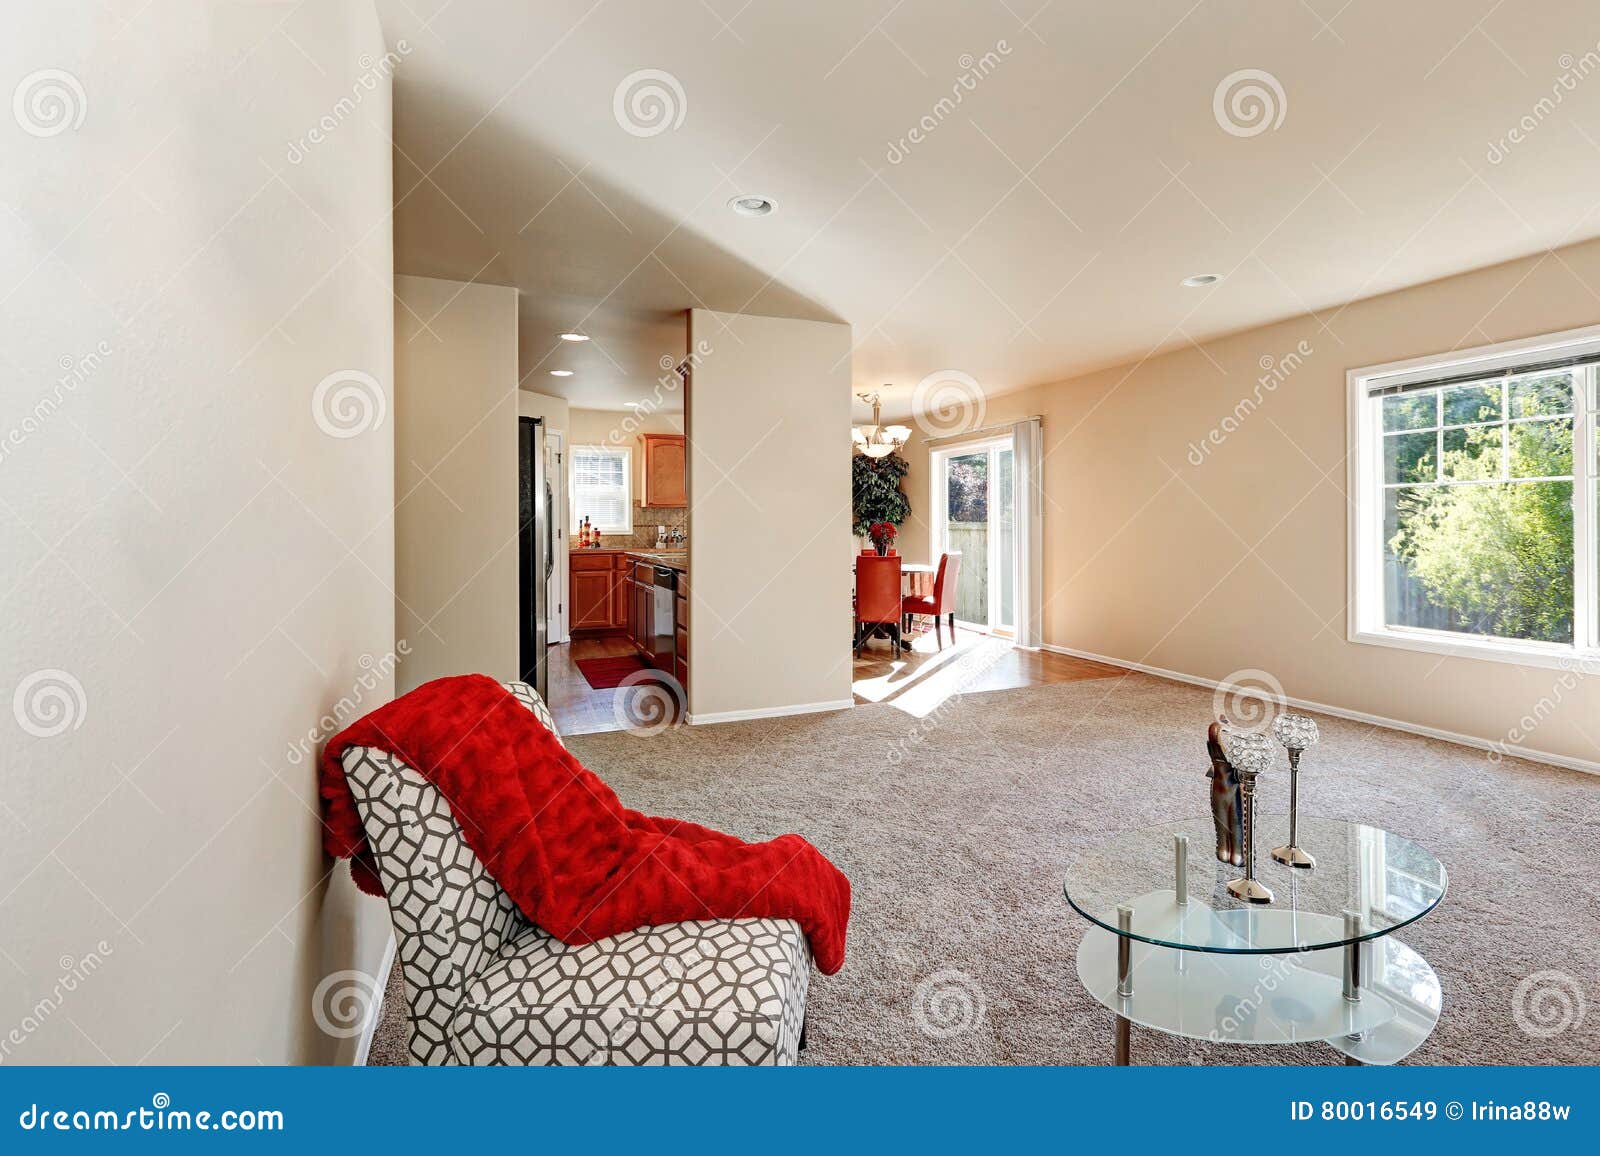 Typical American Living Room Interior Design Stock Image